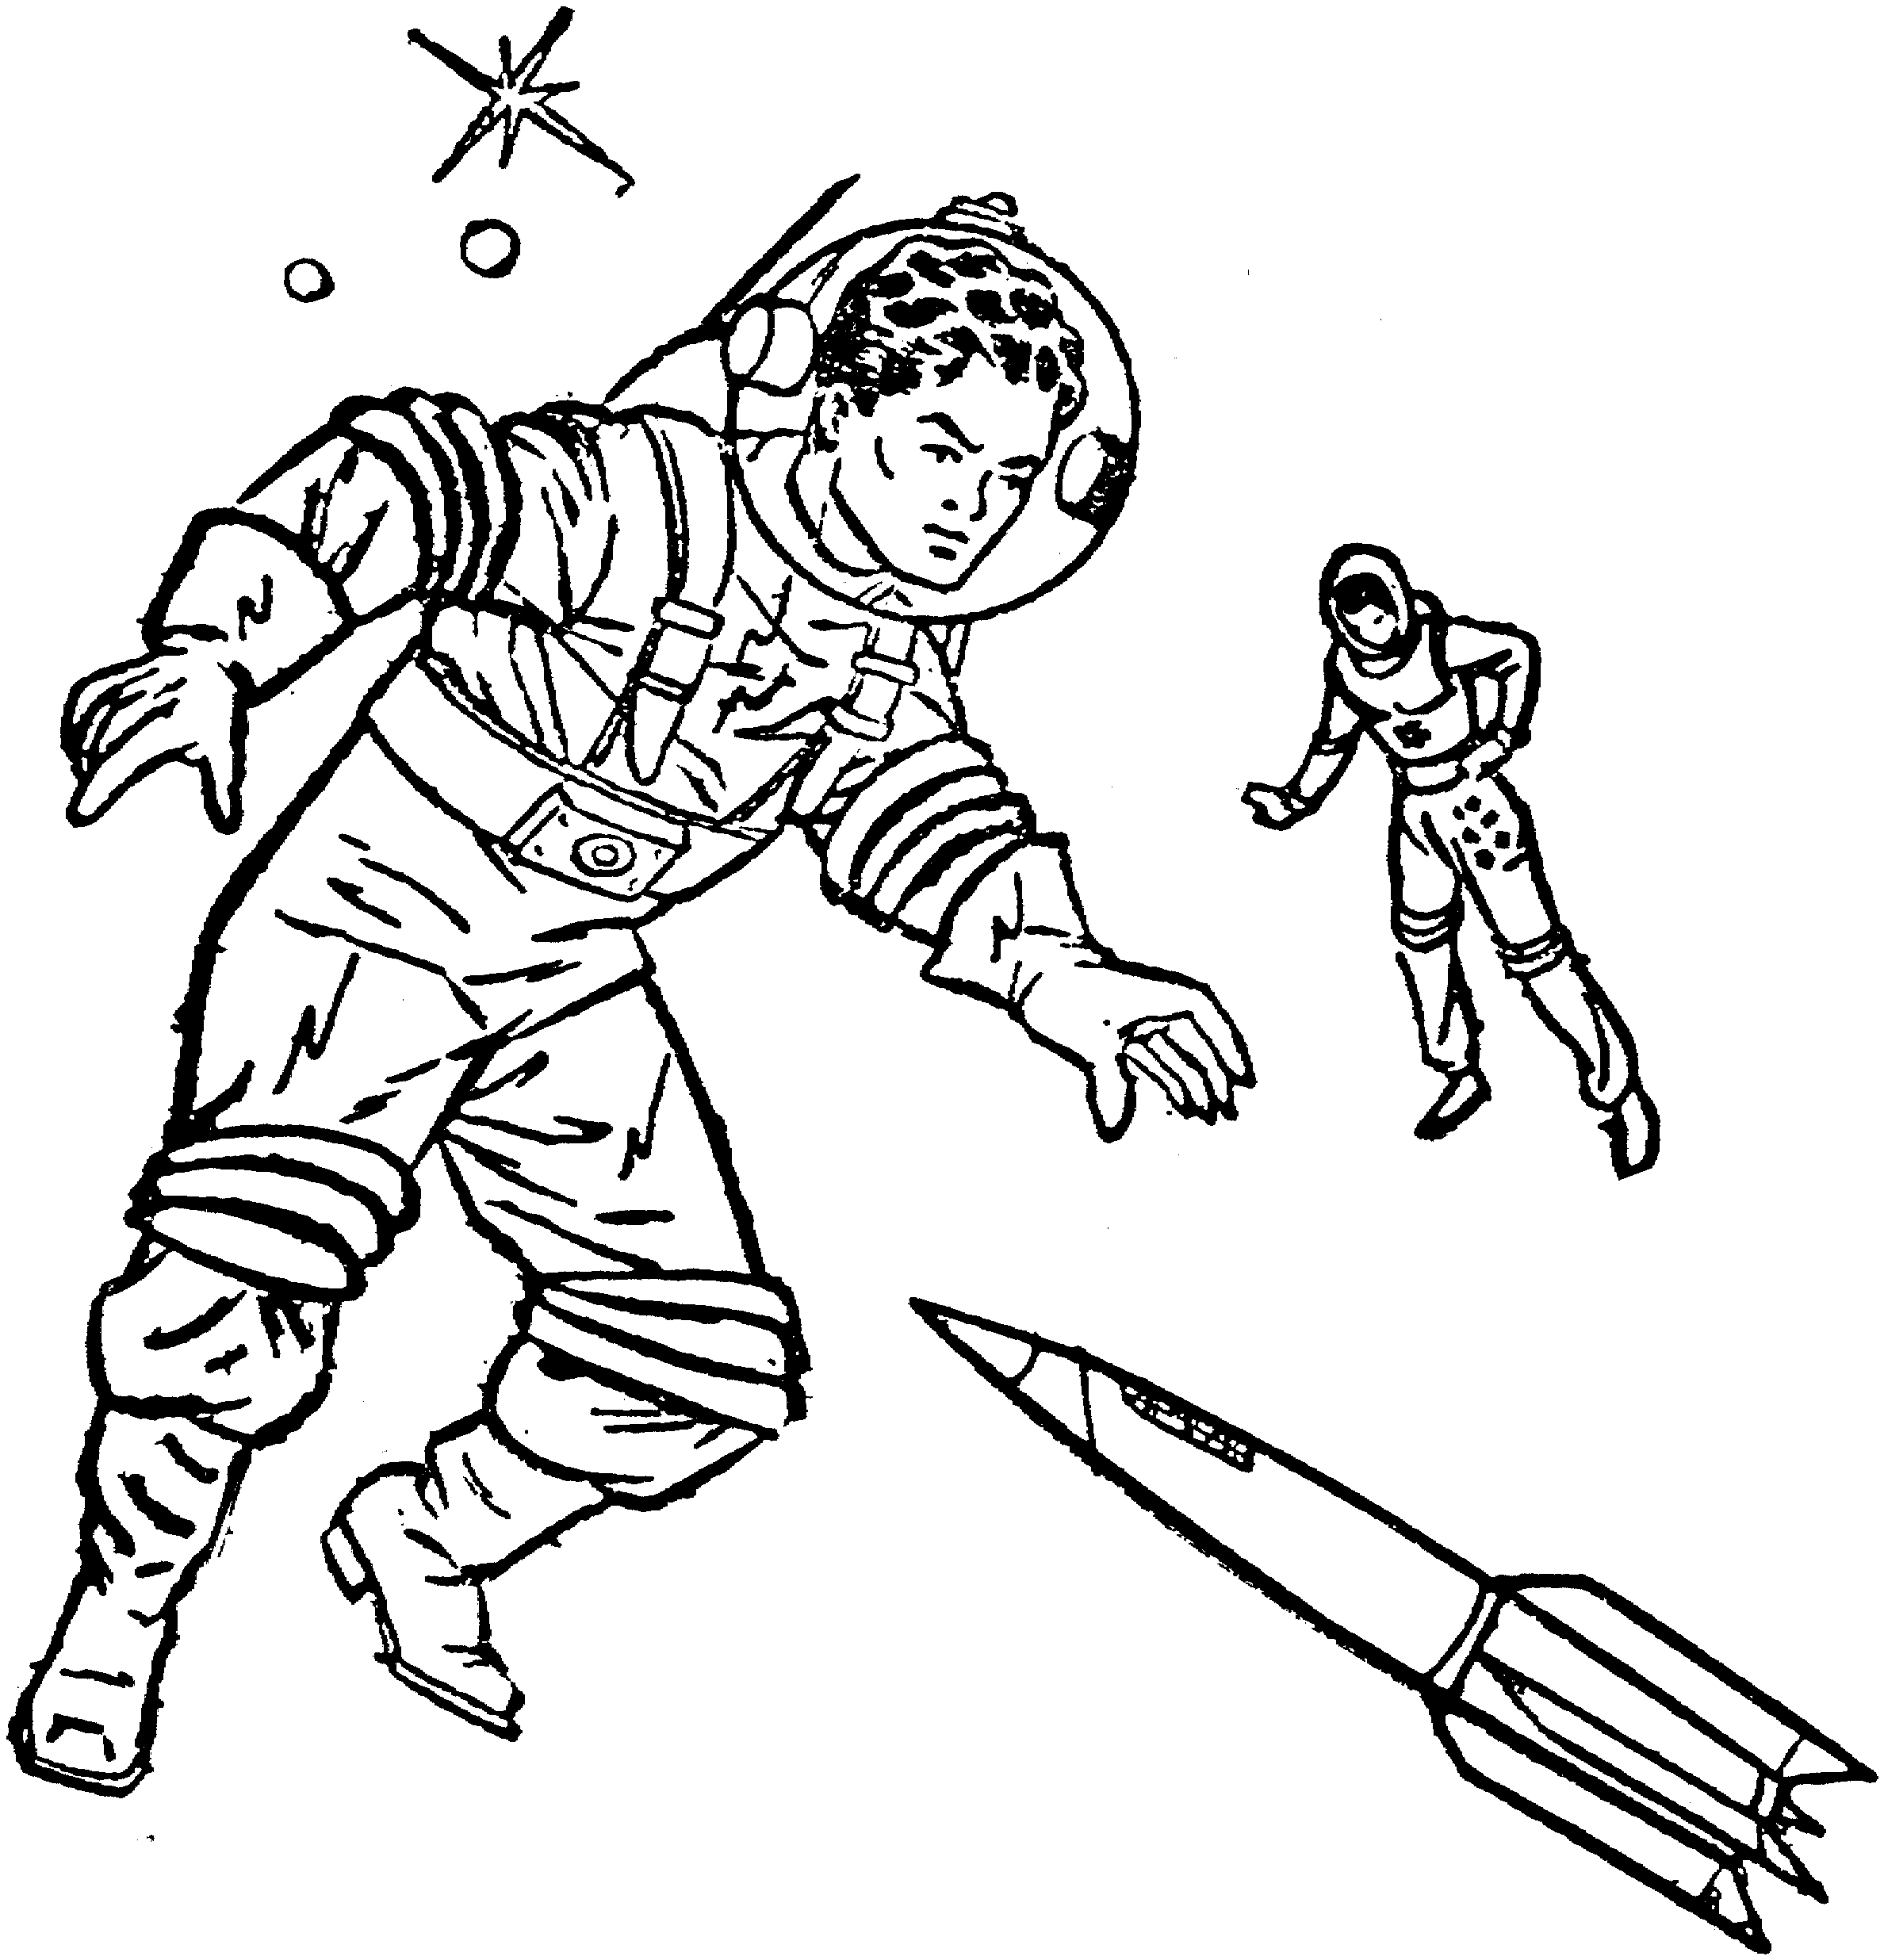 Free Printable Astronaut Coloring Pages For Kids